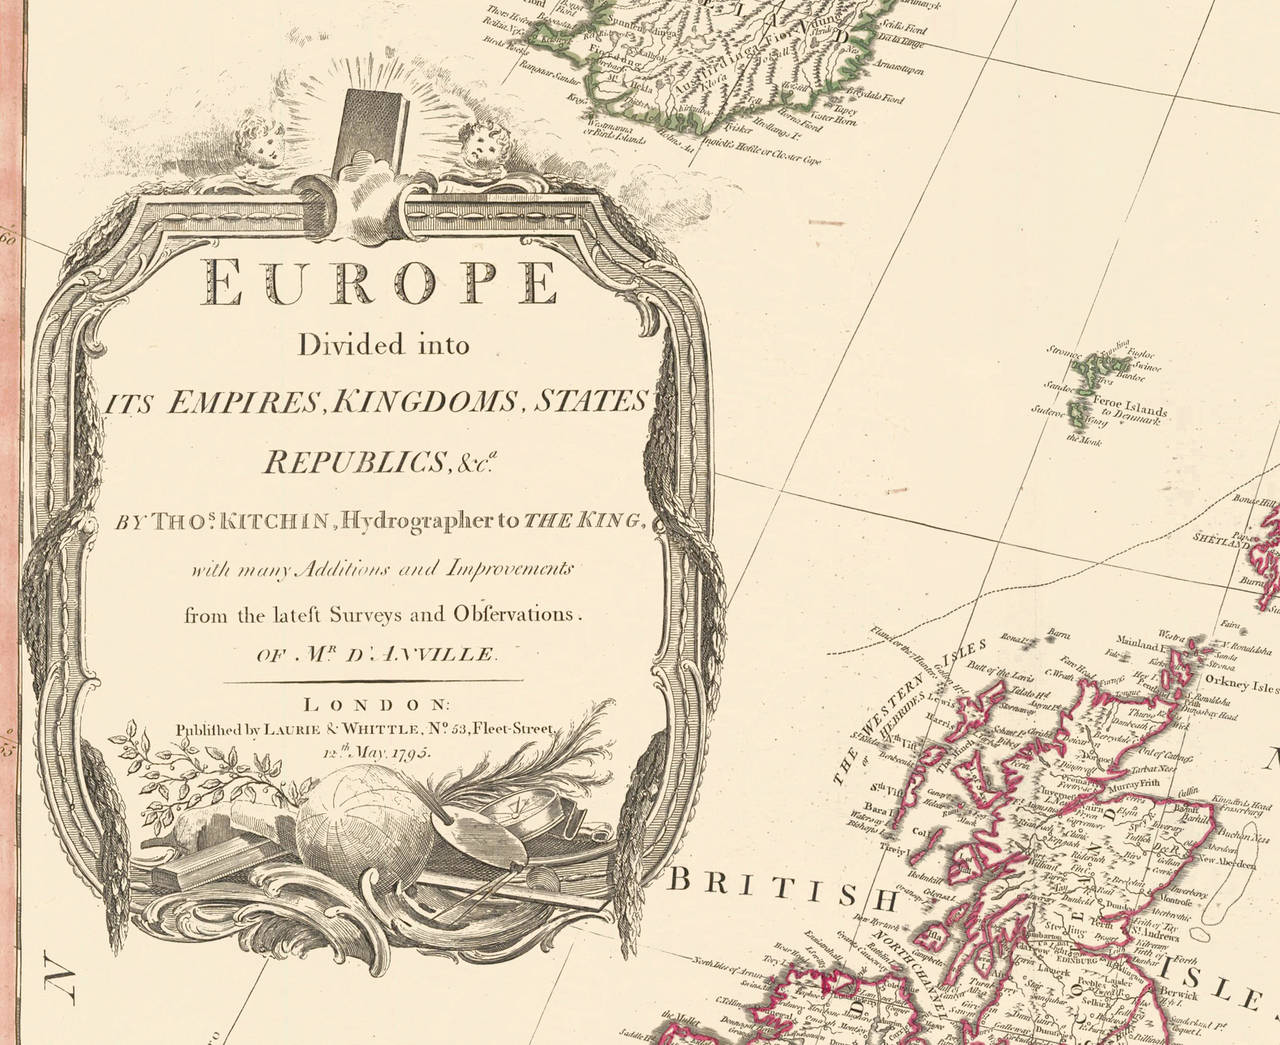 Map of Europe printed on two separate sheets from A New Universal Atlas by Thomas Kitchin. Published in London by Laurie & Whittle, 1798. Original engravings hand-colored at publication. Each sheet is 21 1/4